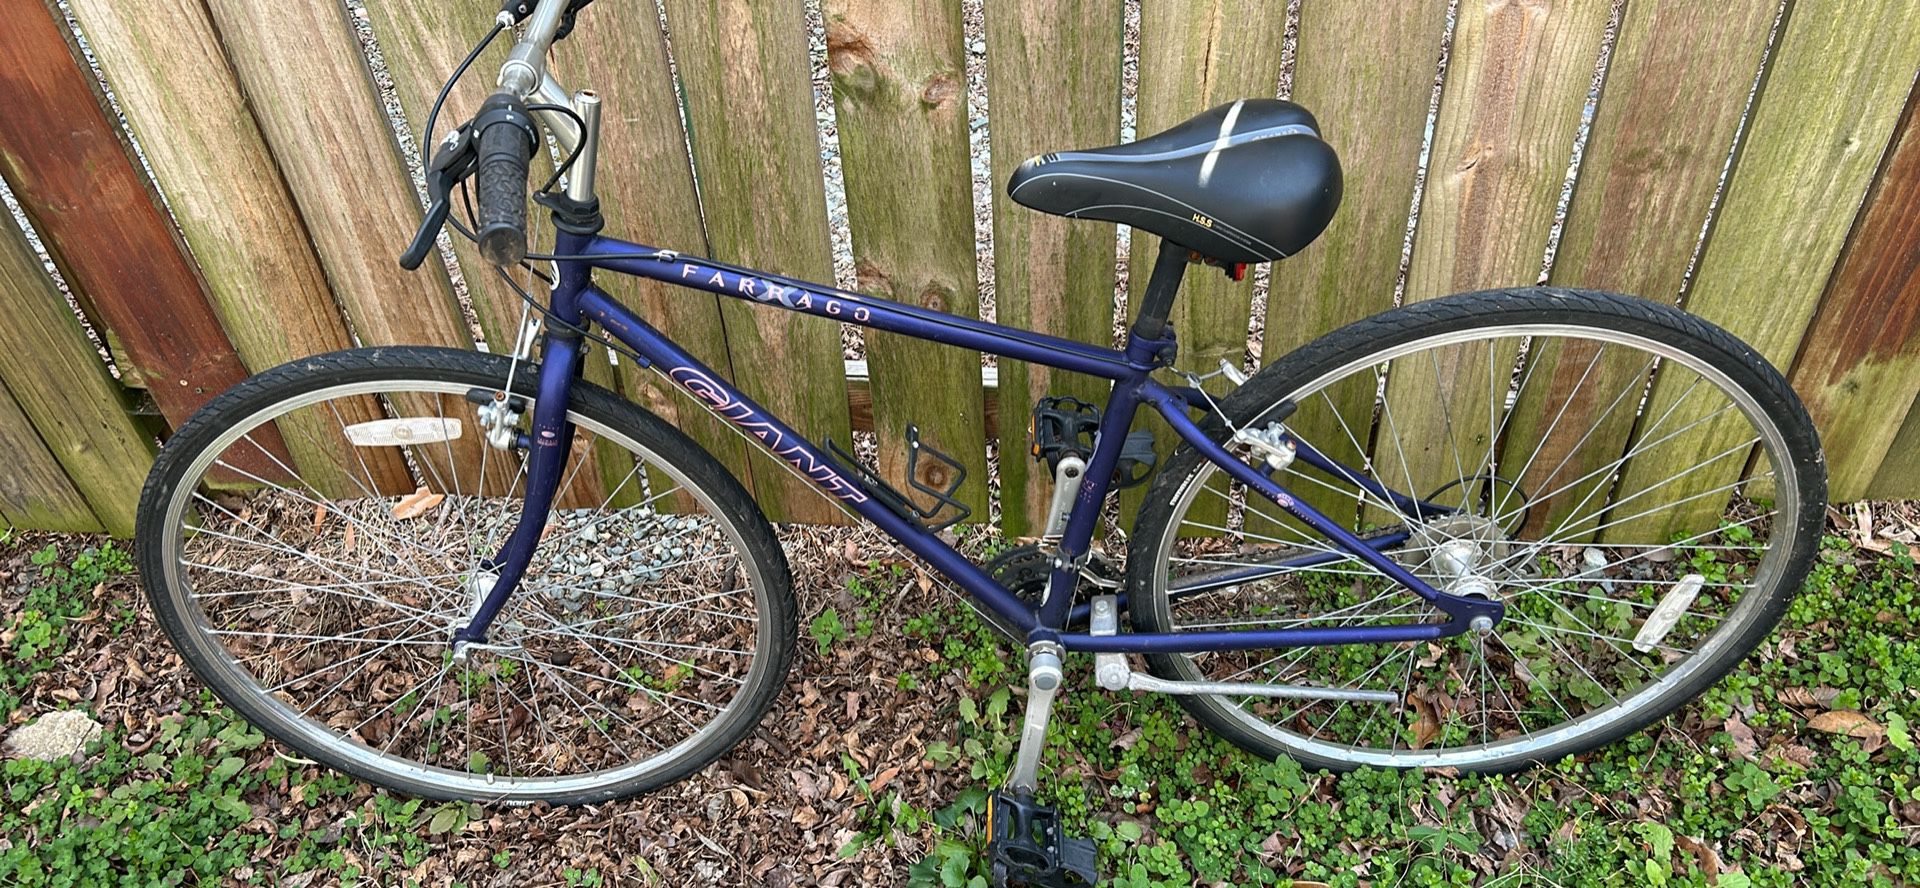 Giant Brand Bike Great Condition Size 15 